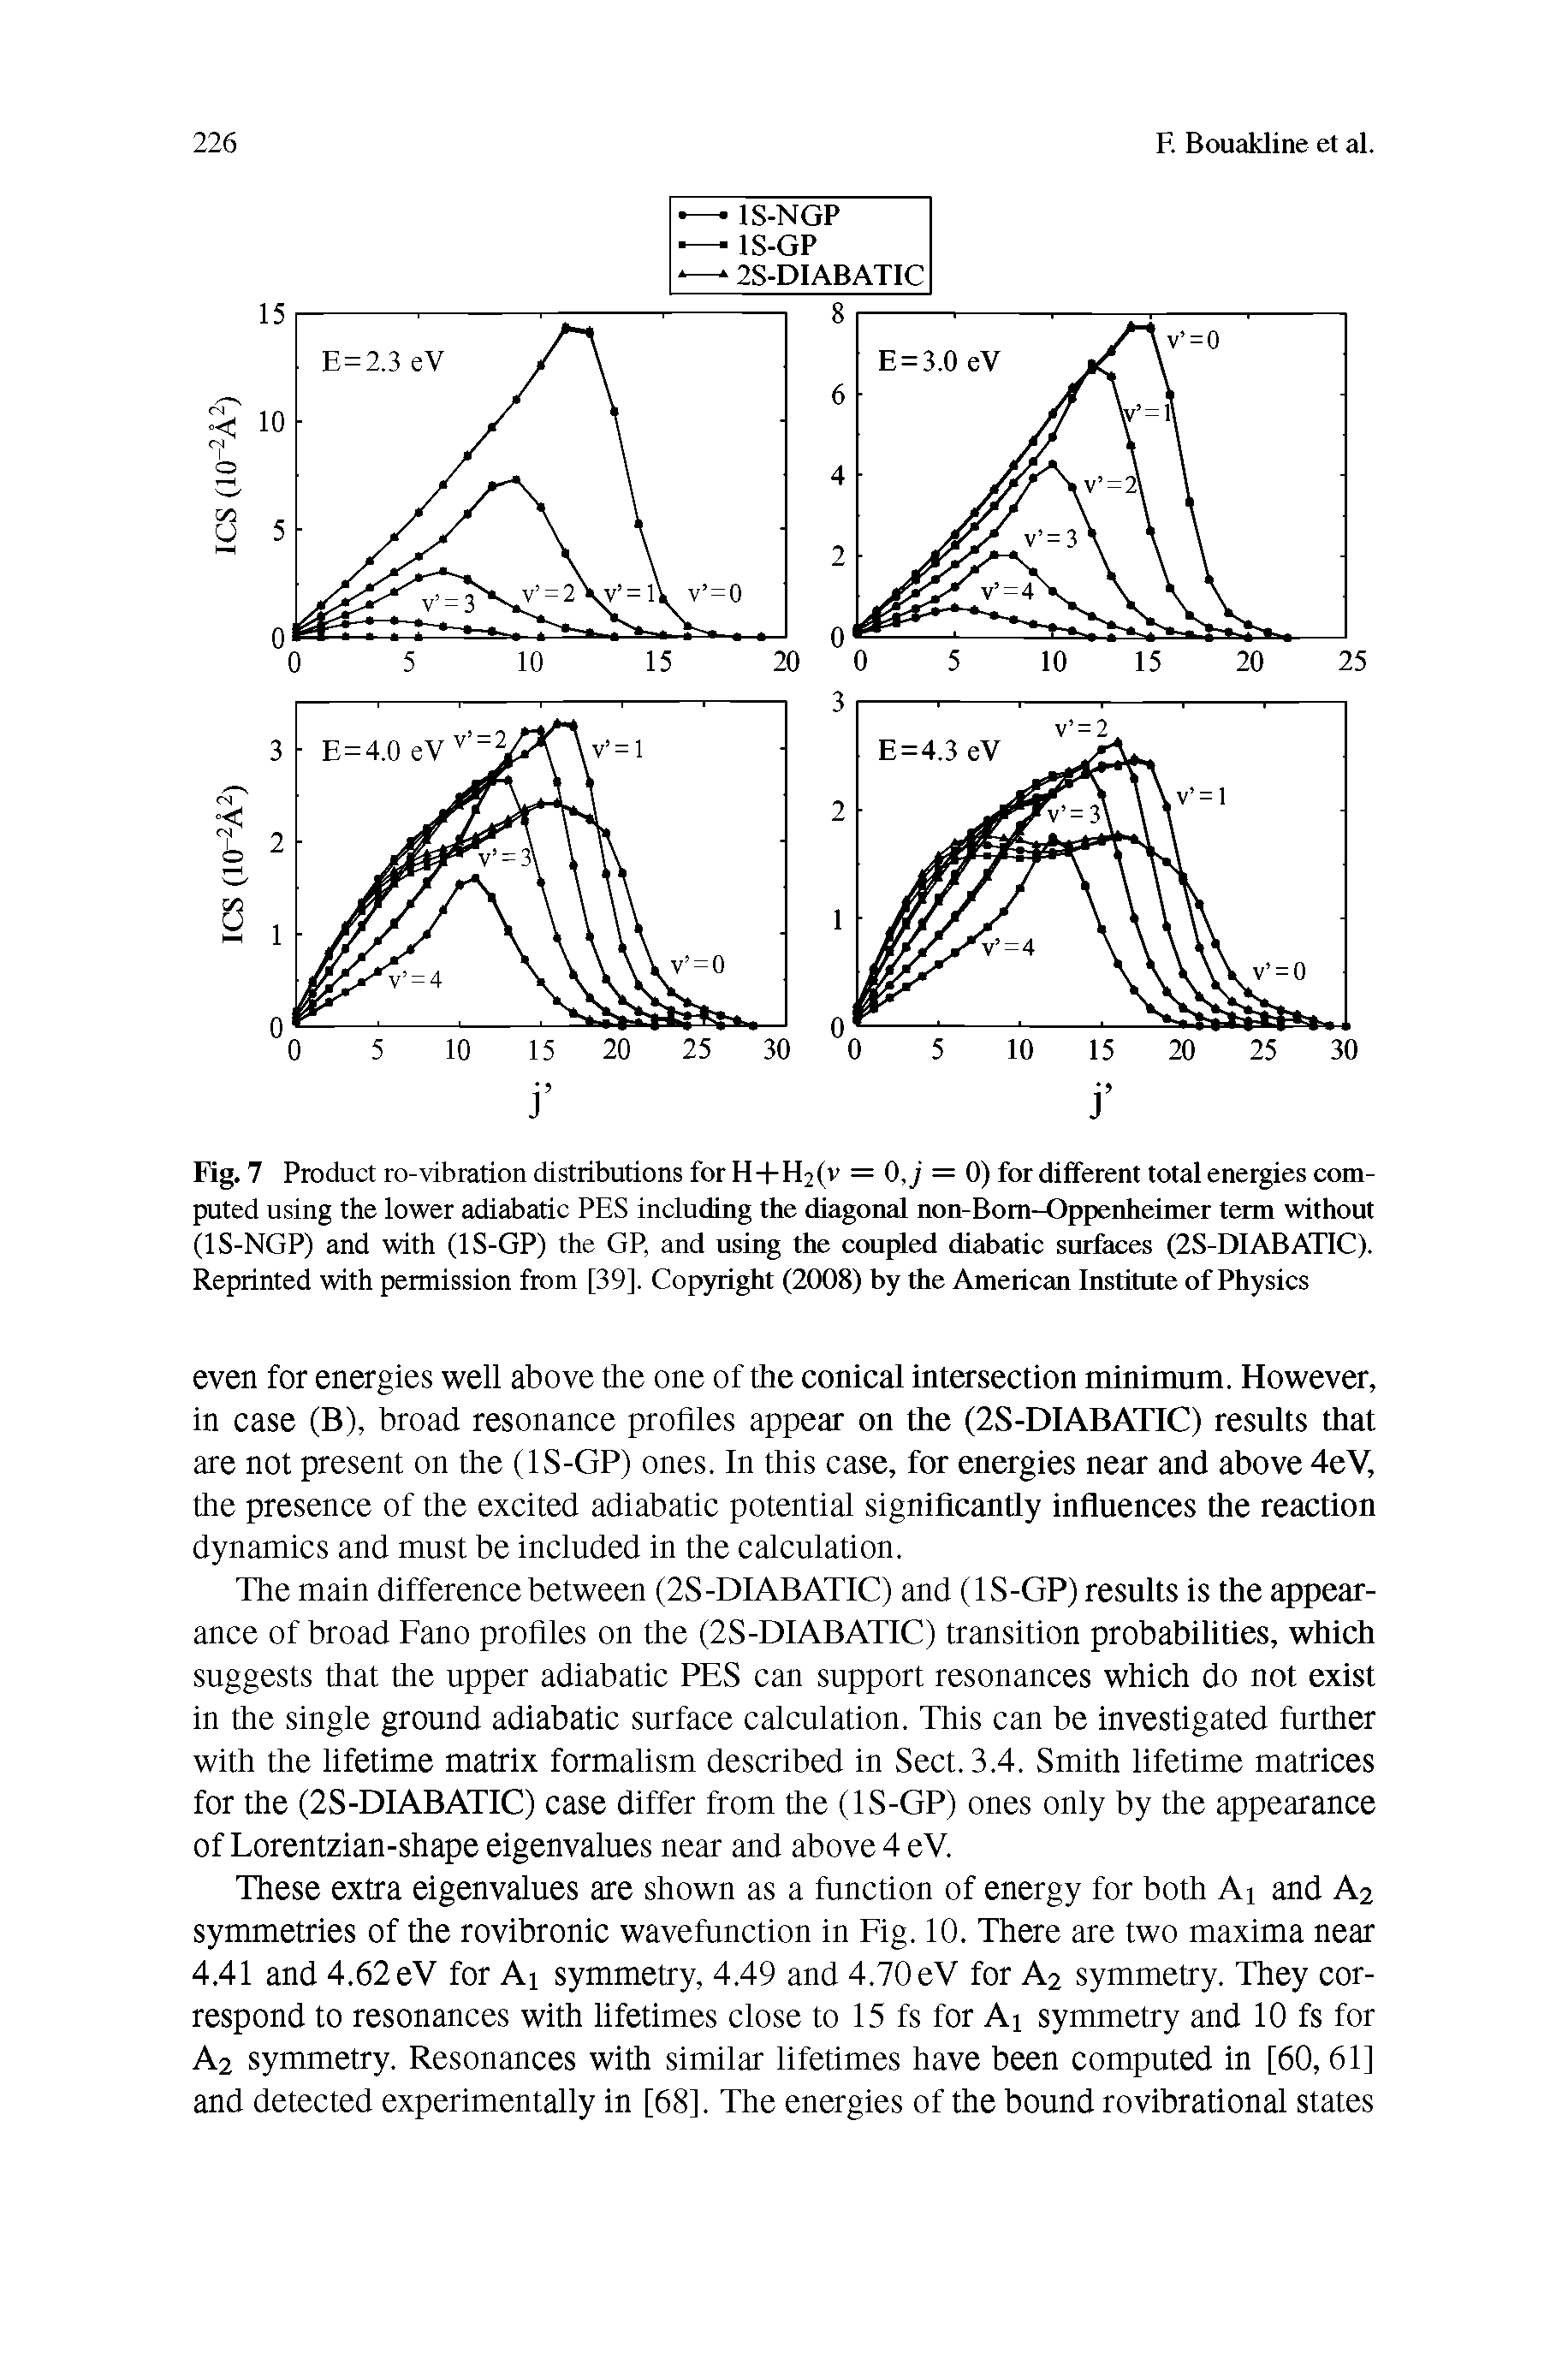 Fig. 7 Product ro-vibration distributions for H+H2(v = OJ = 0) for different total energies computed using the lower adiabatic PES including the diagonal non-Bom-Oppenheimer term without (IS-NGP) and with (IS-GP) the GP, and using the coupled diabatic surfaces (2S-DIABATIC). Reprinted with permission from [39]. Copyright (2008) by the American Institute of Physics...